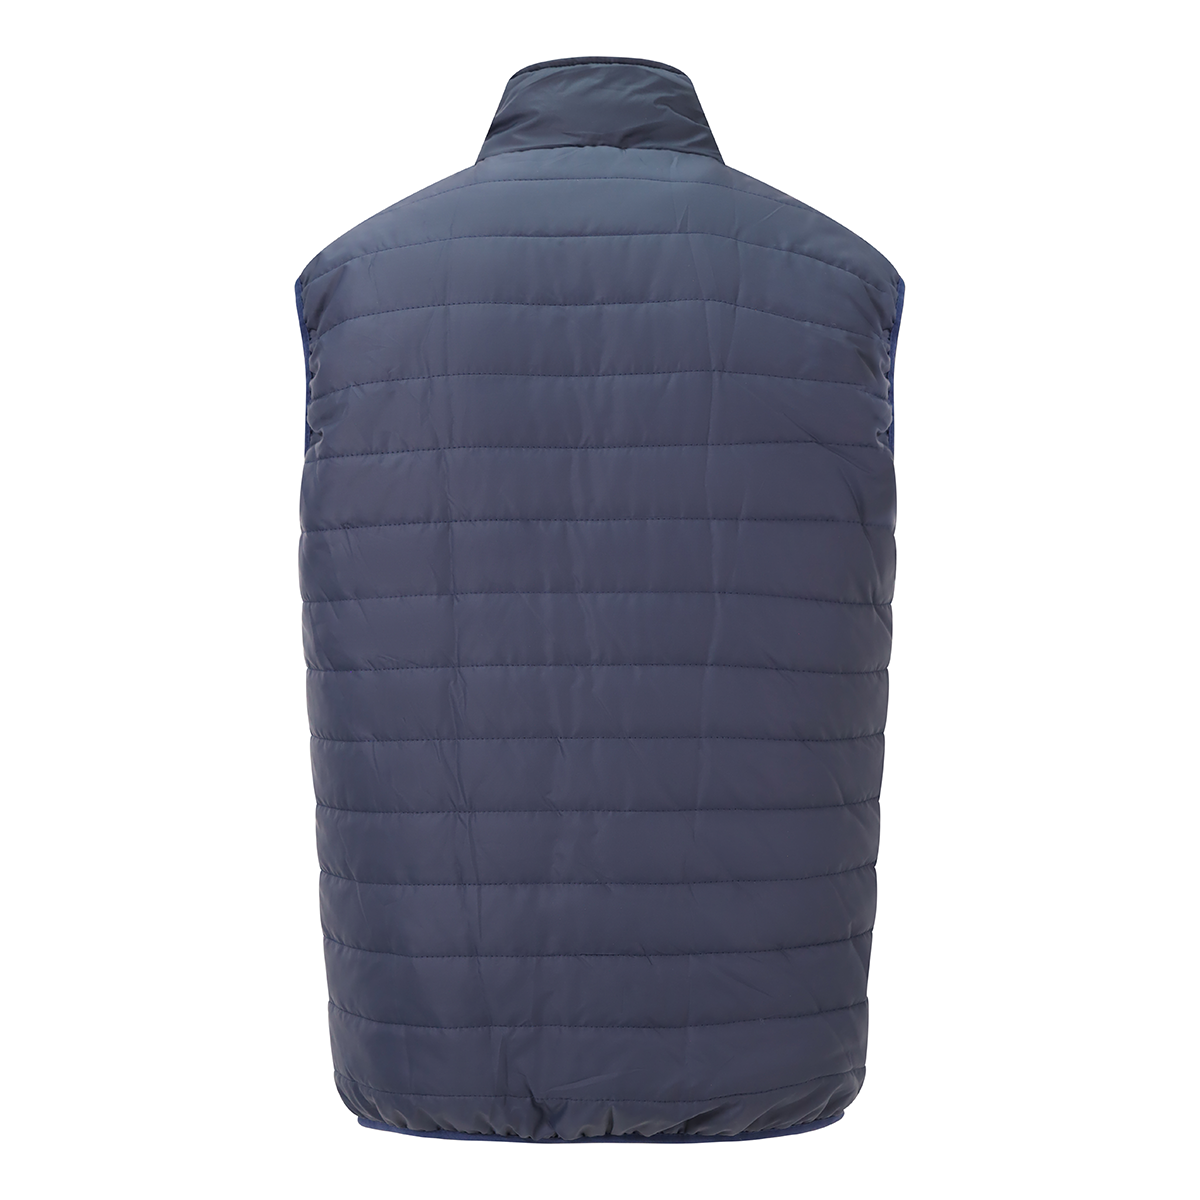 Mc Keever St Mary's College RFC Core 22 Padded Gilet - Adult - Navy